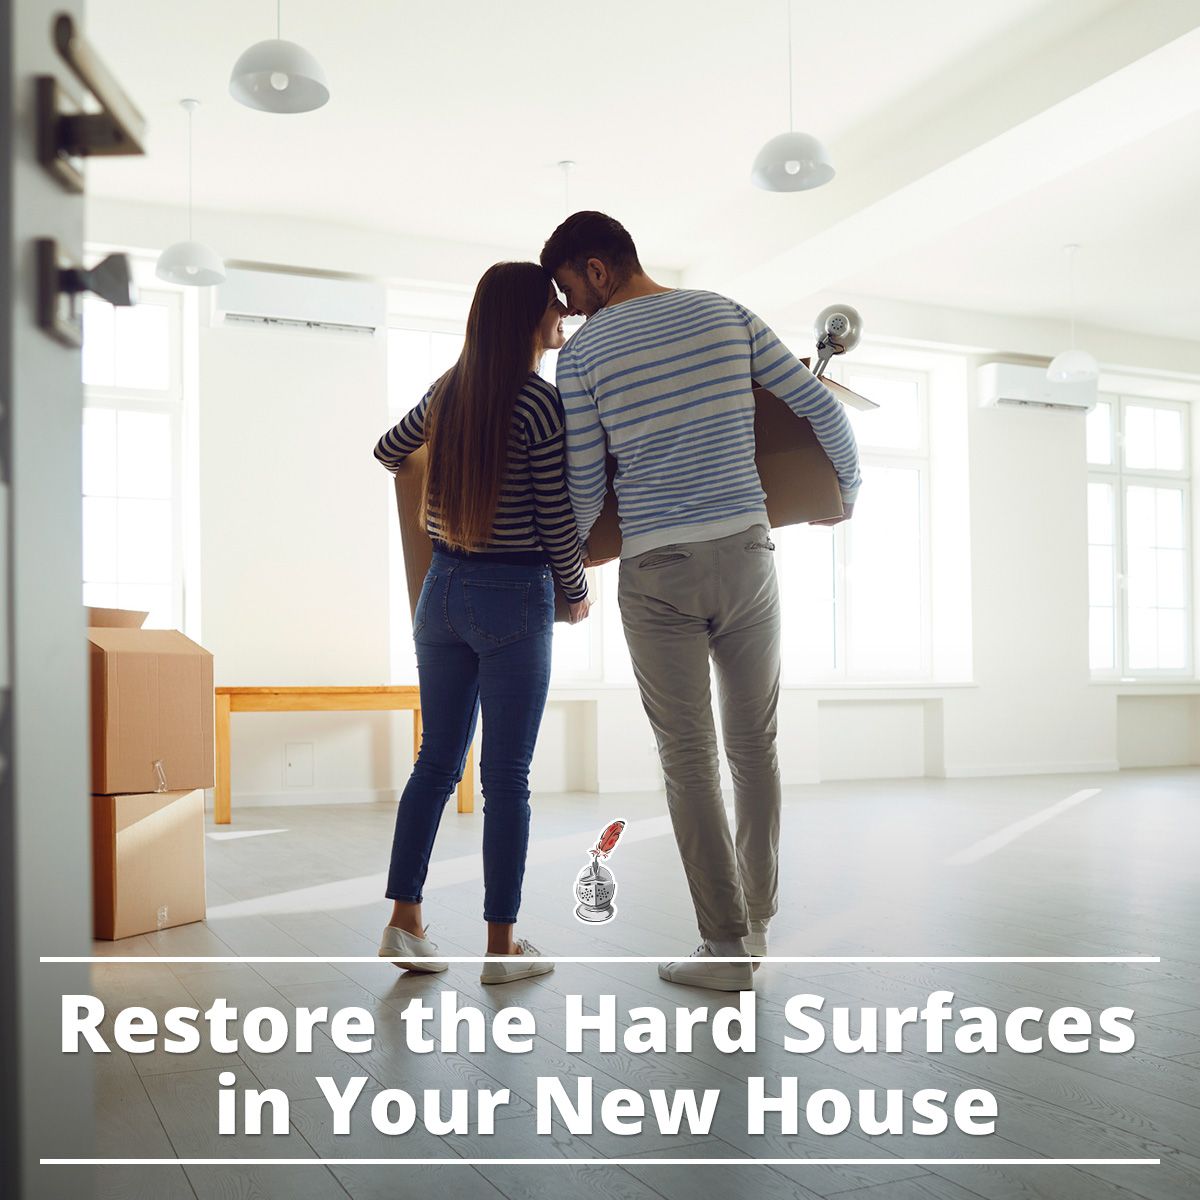 Restore the Hard Surfaces in Your New House